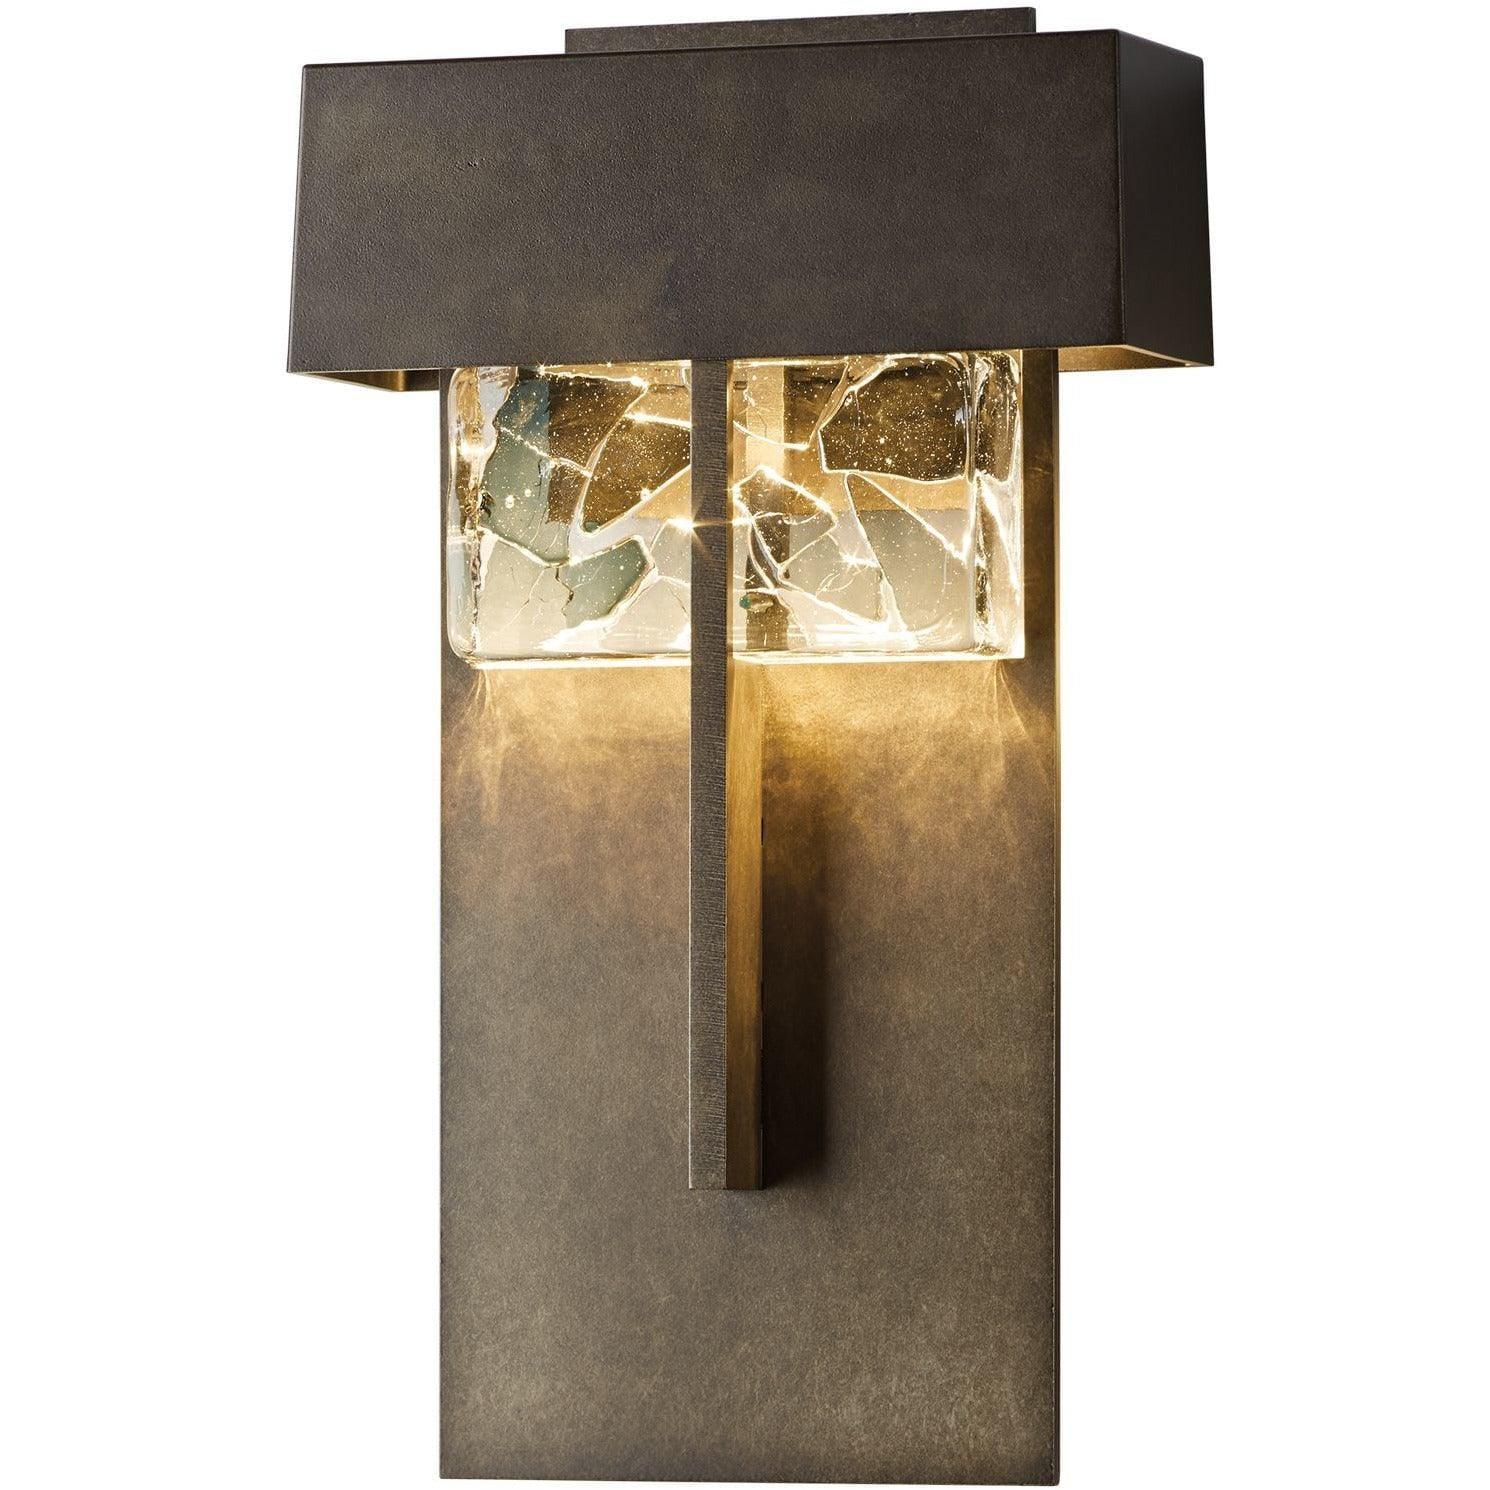 Hubbardton Forge - Shard 14-Inch LED Outdoor Wall Sconce - 302517-LED-77-YP0501 | Montreal Lighting & Hardware